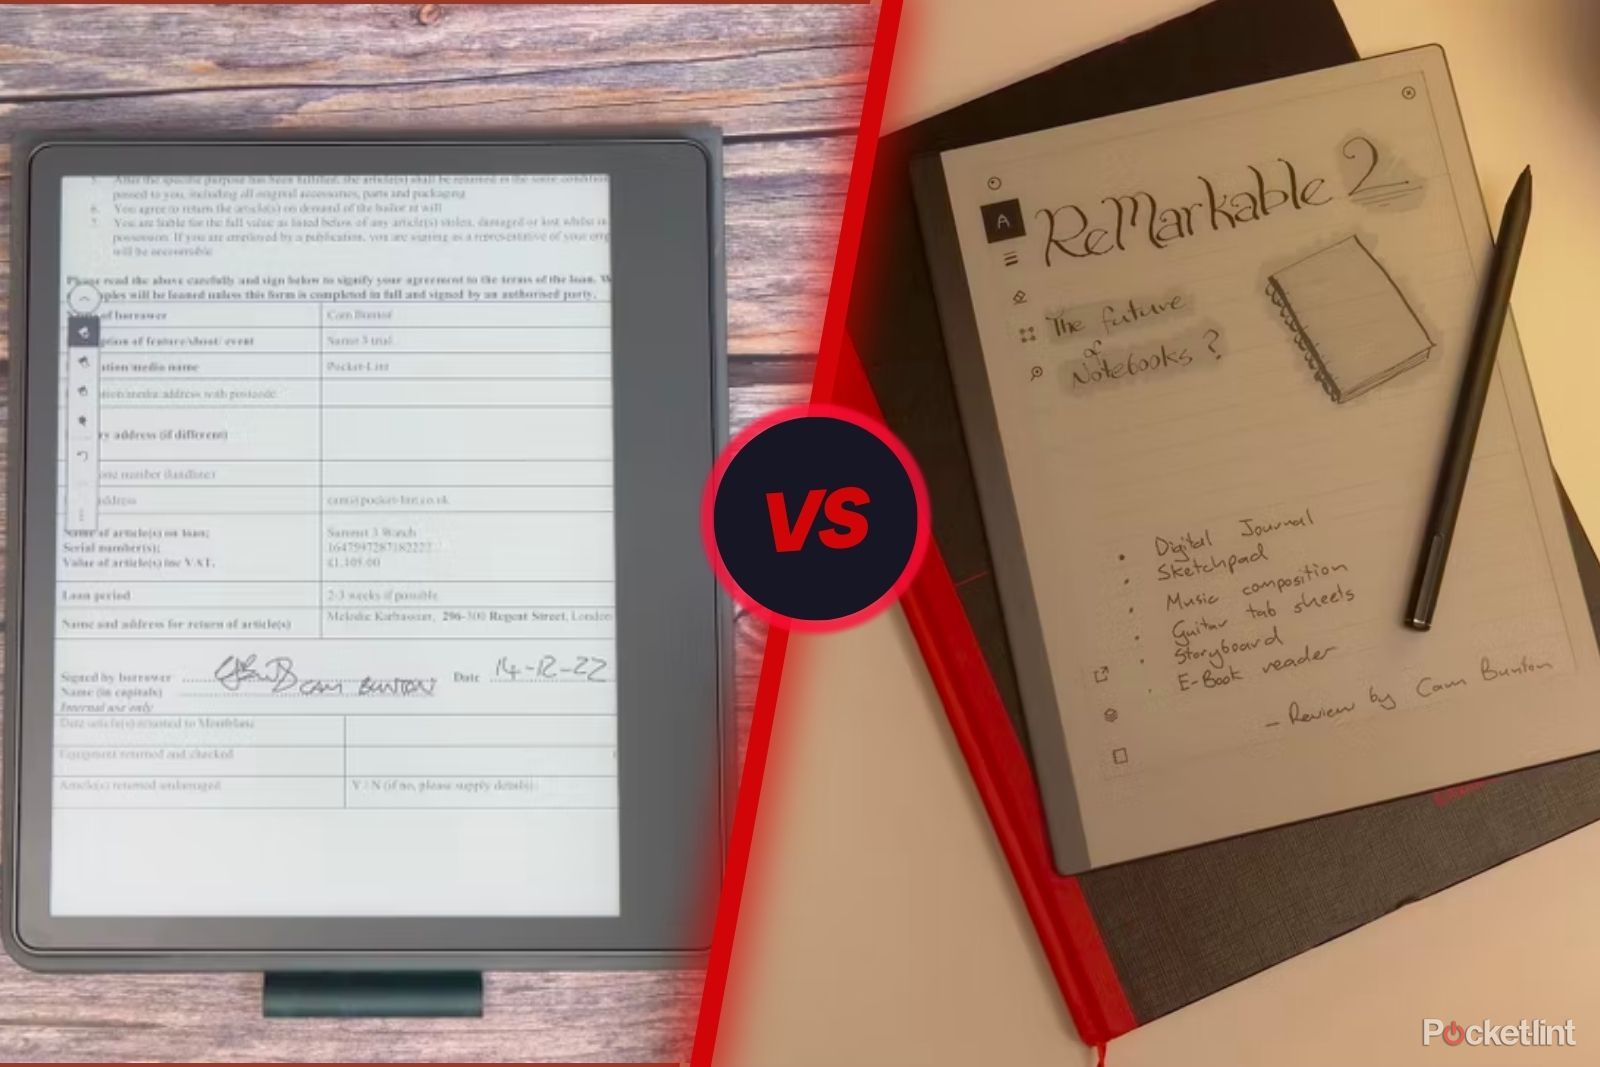 Kindle Scribe Vs Remarkable 2: Which Is Better? (Comparison) 2023